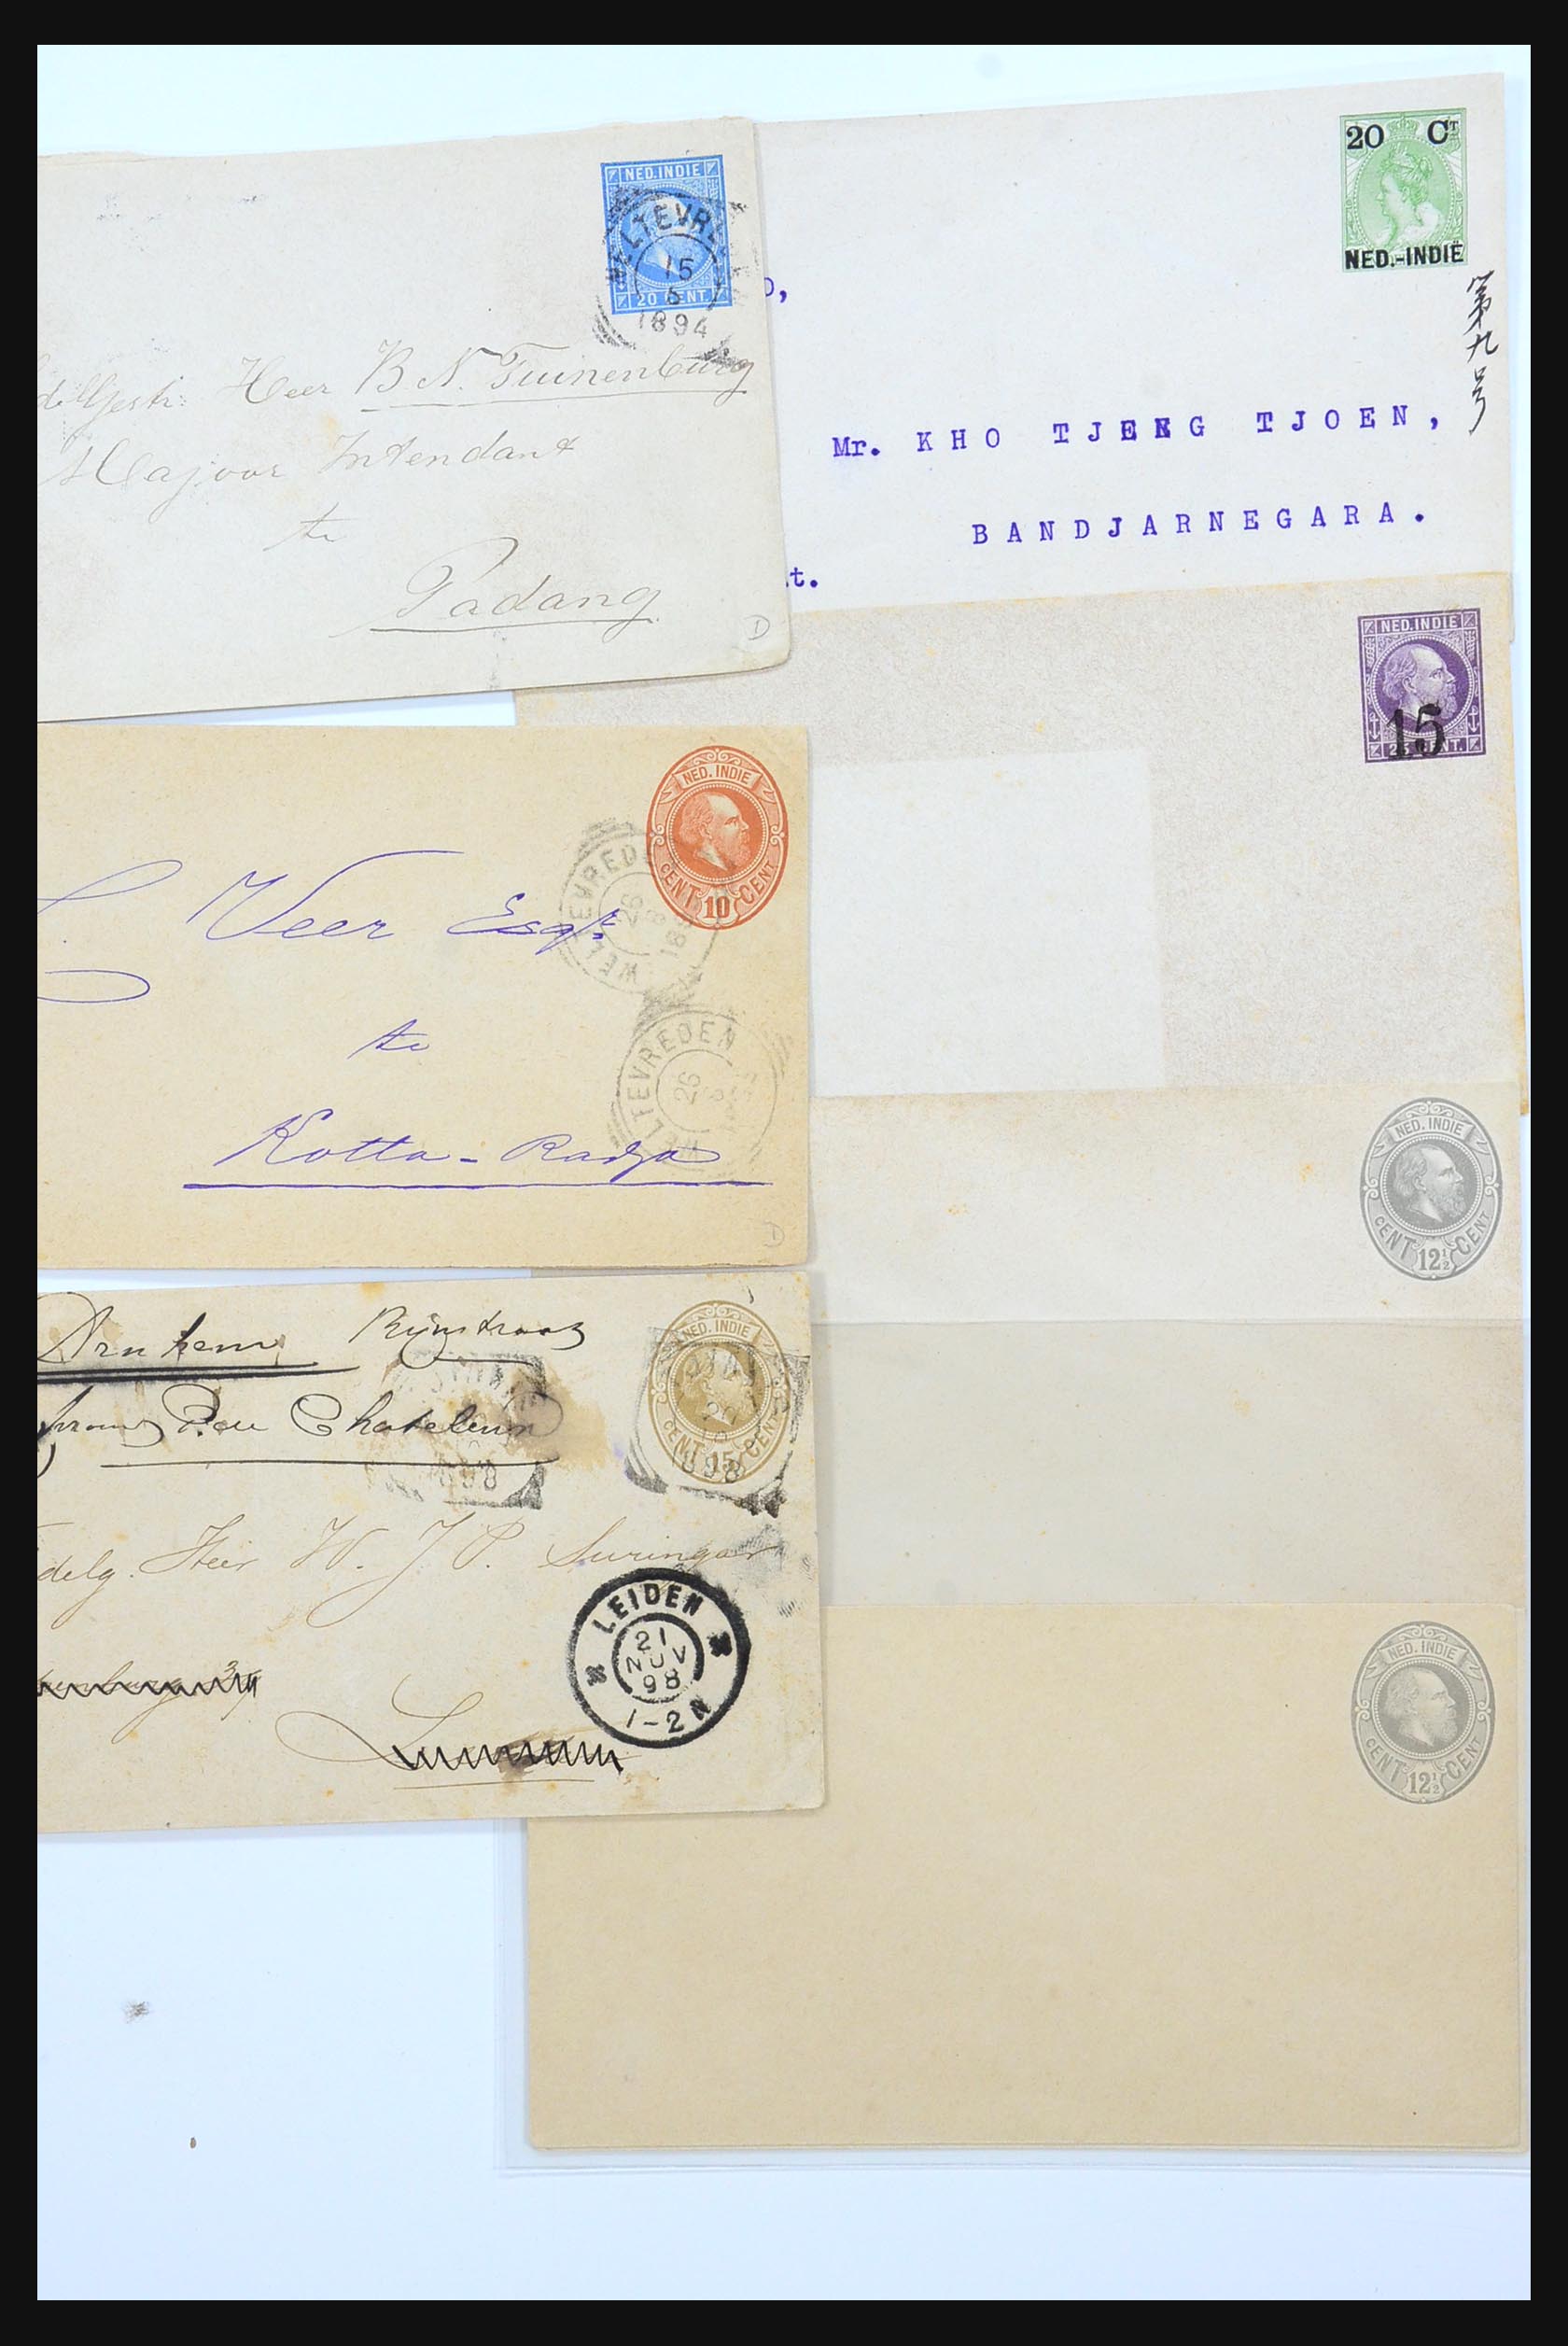 31361 029 - 31361 Netherlands Indies covers 1880-1950.